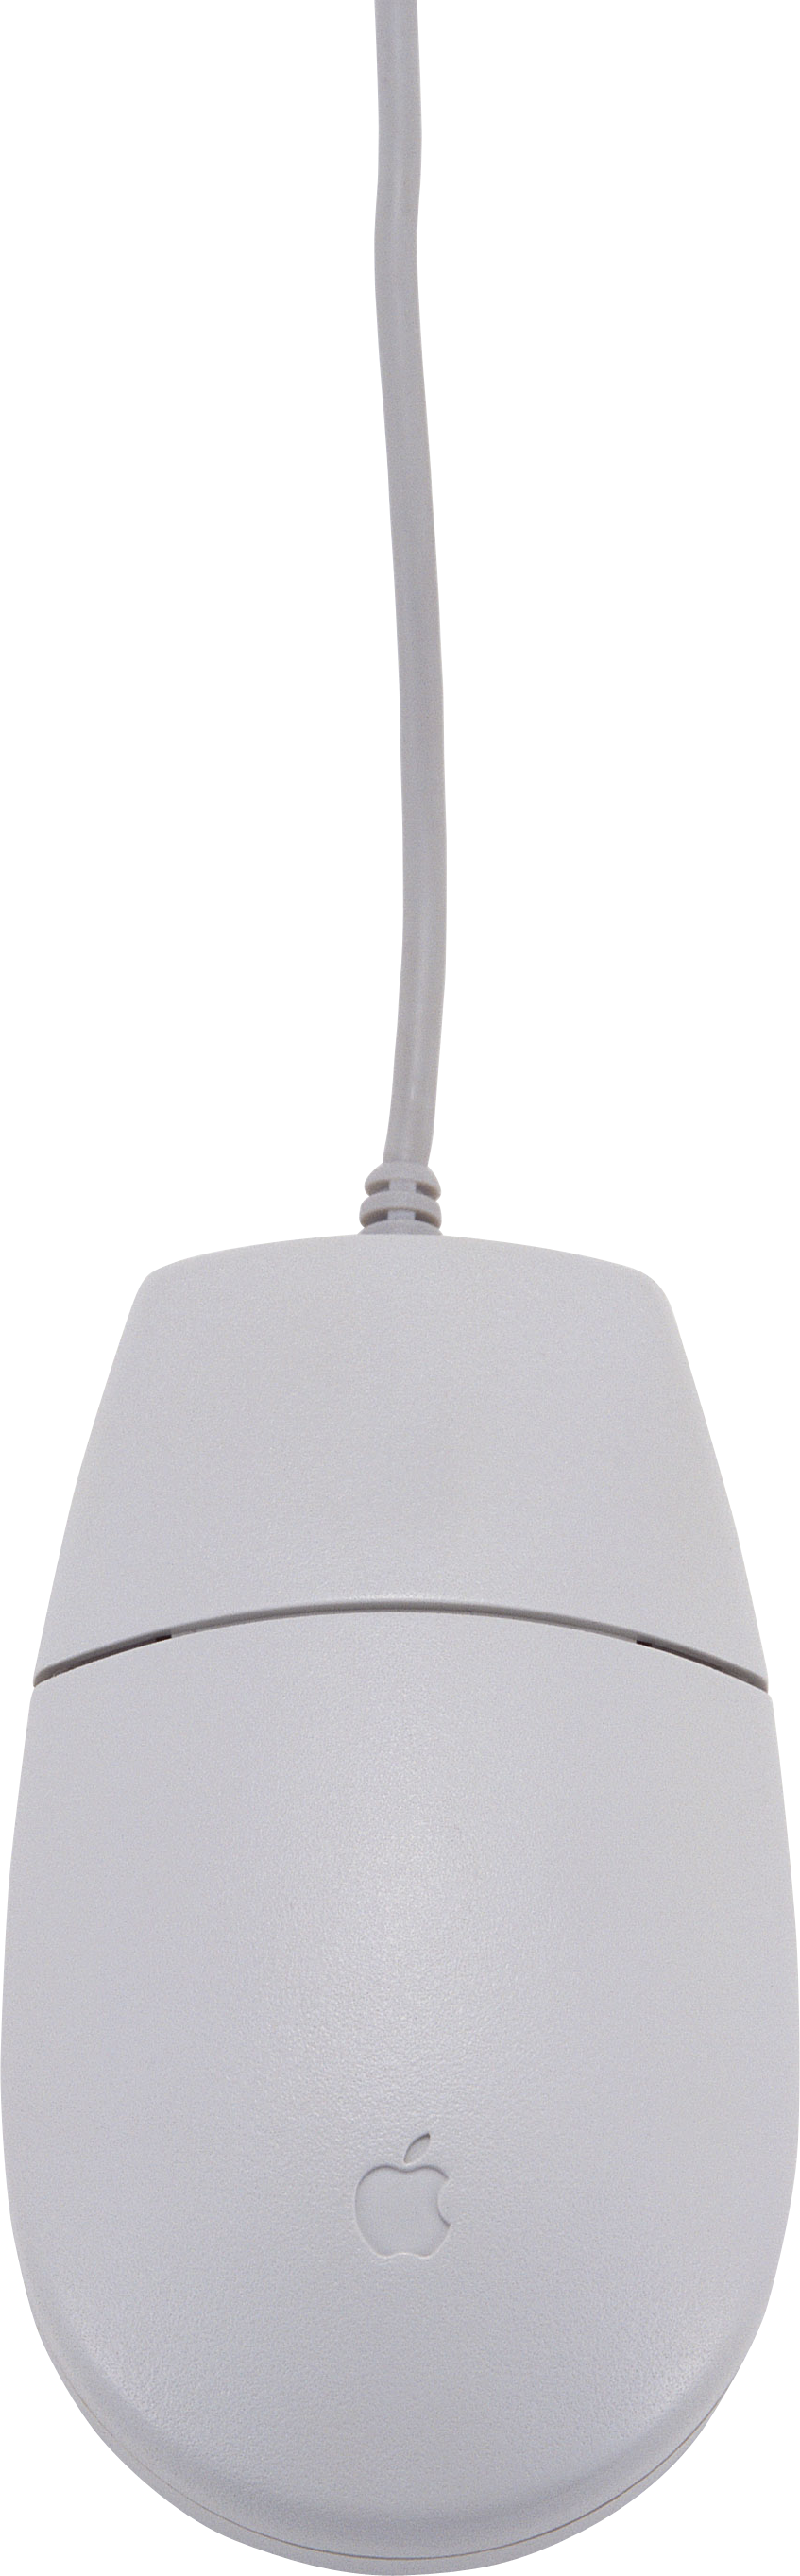 A White Light Fixture With A Cord